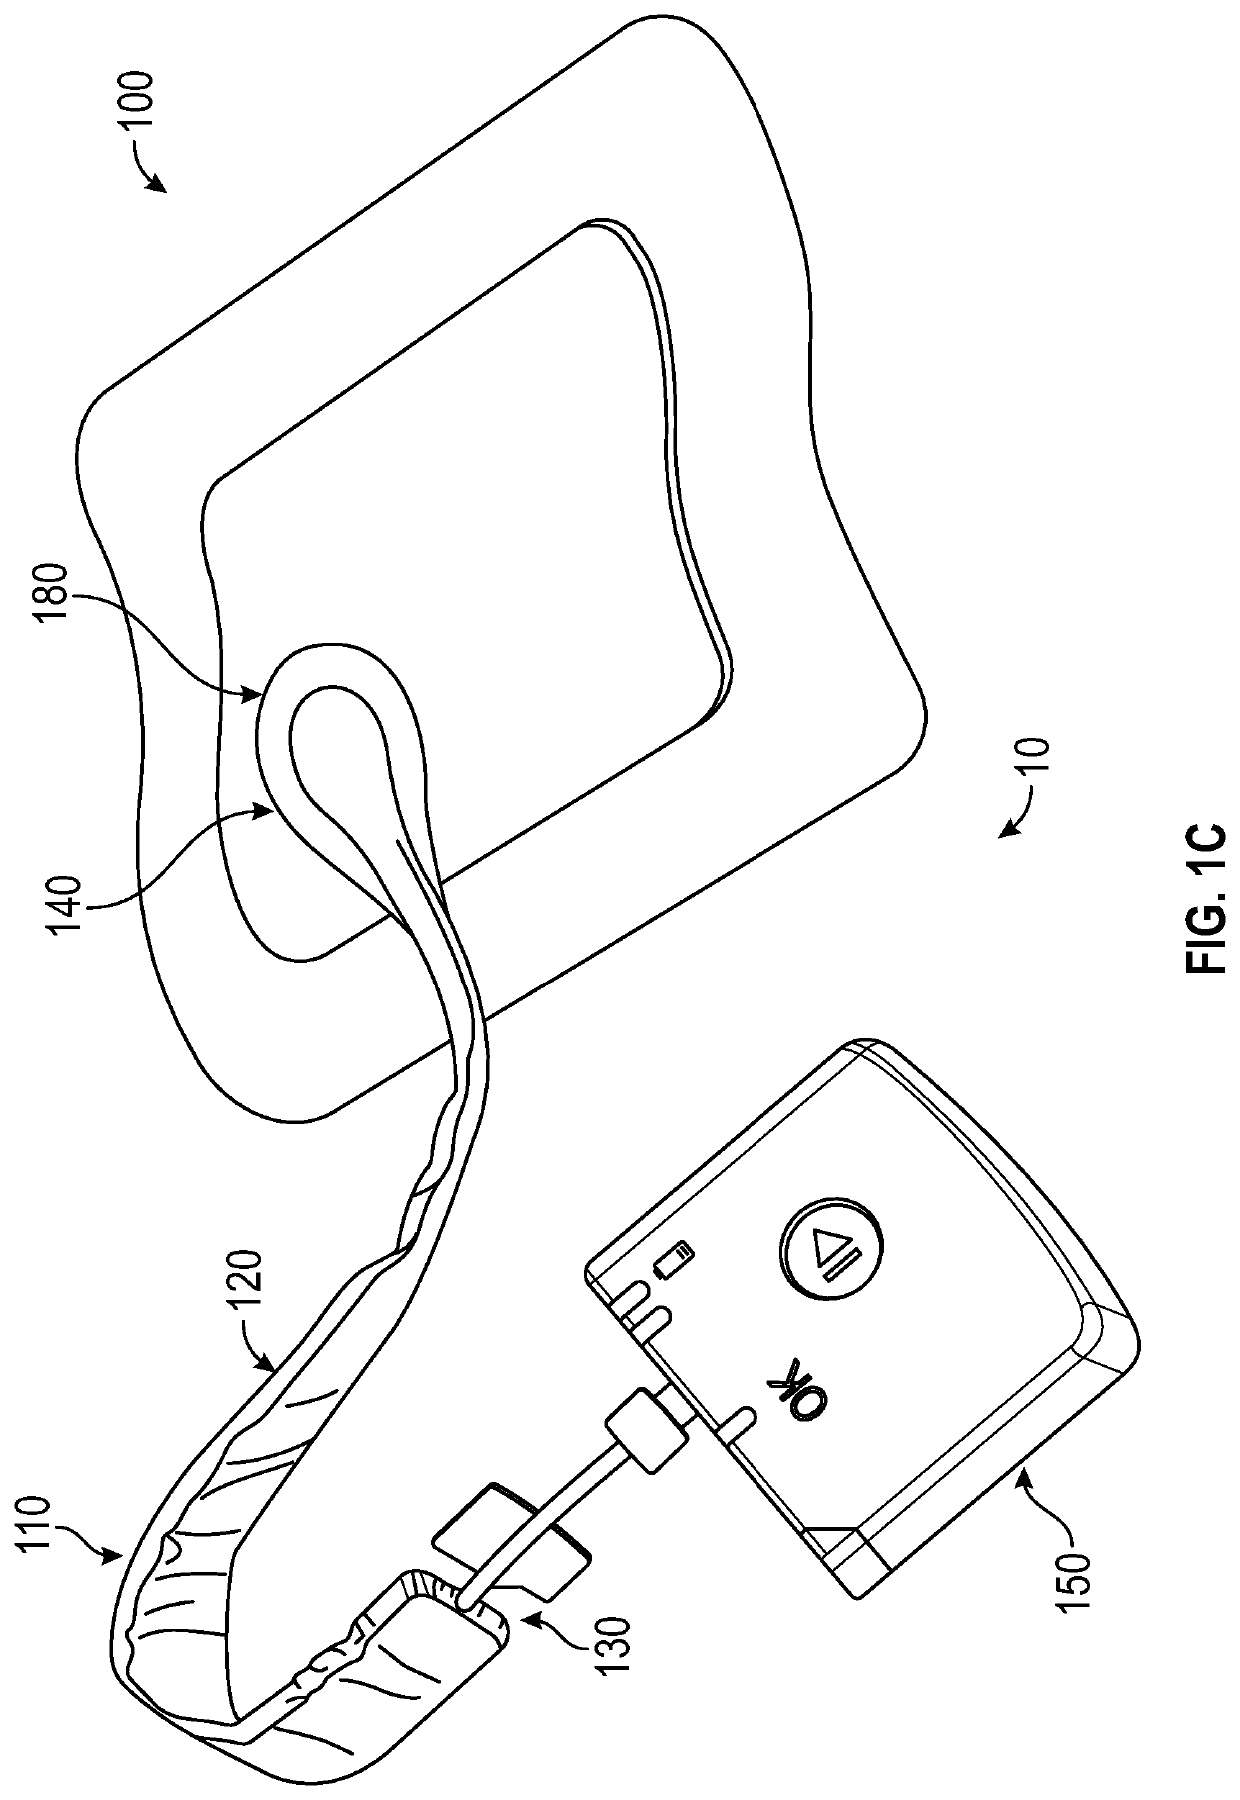 Neurostimulation and monitoring using sensor enabled wound monitoring and therapy apparatus